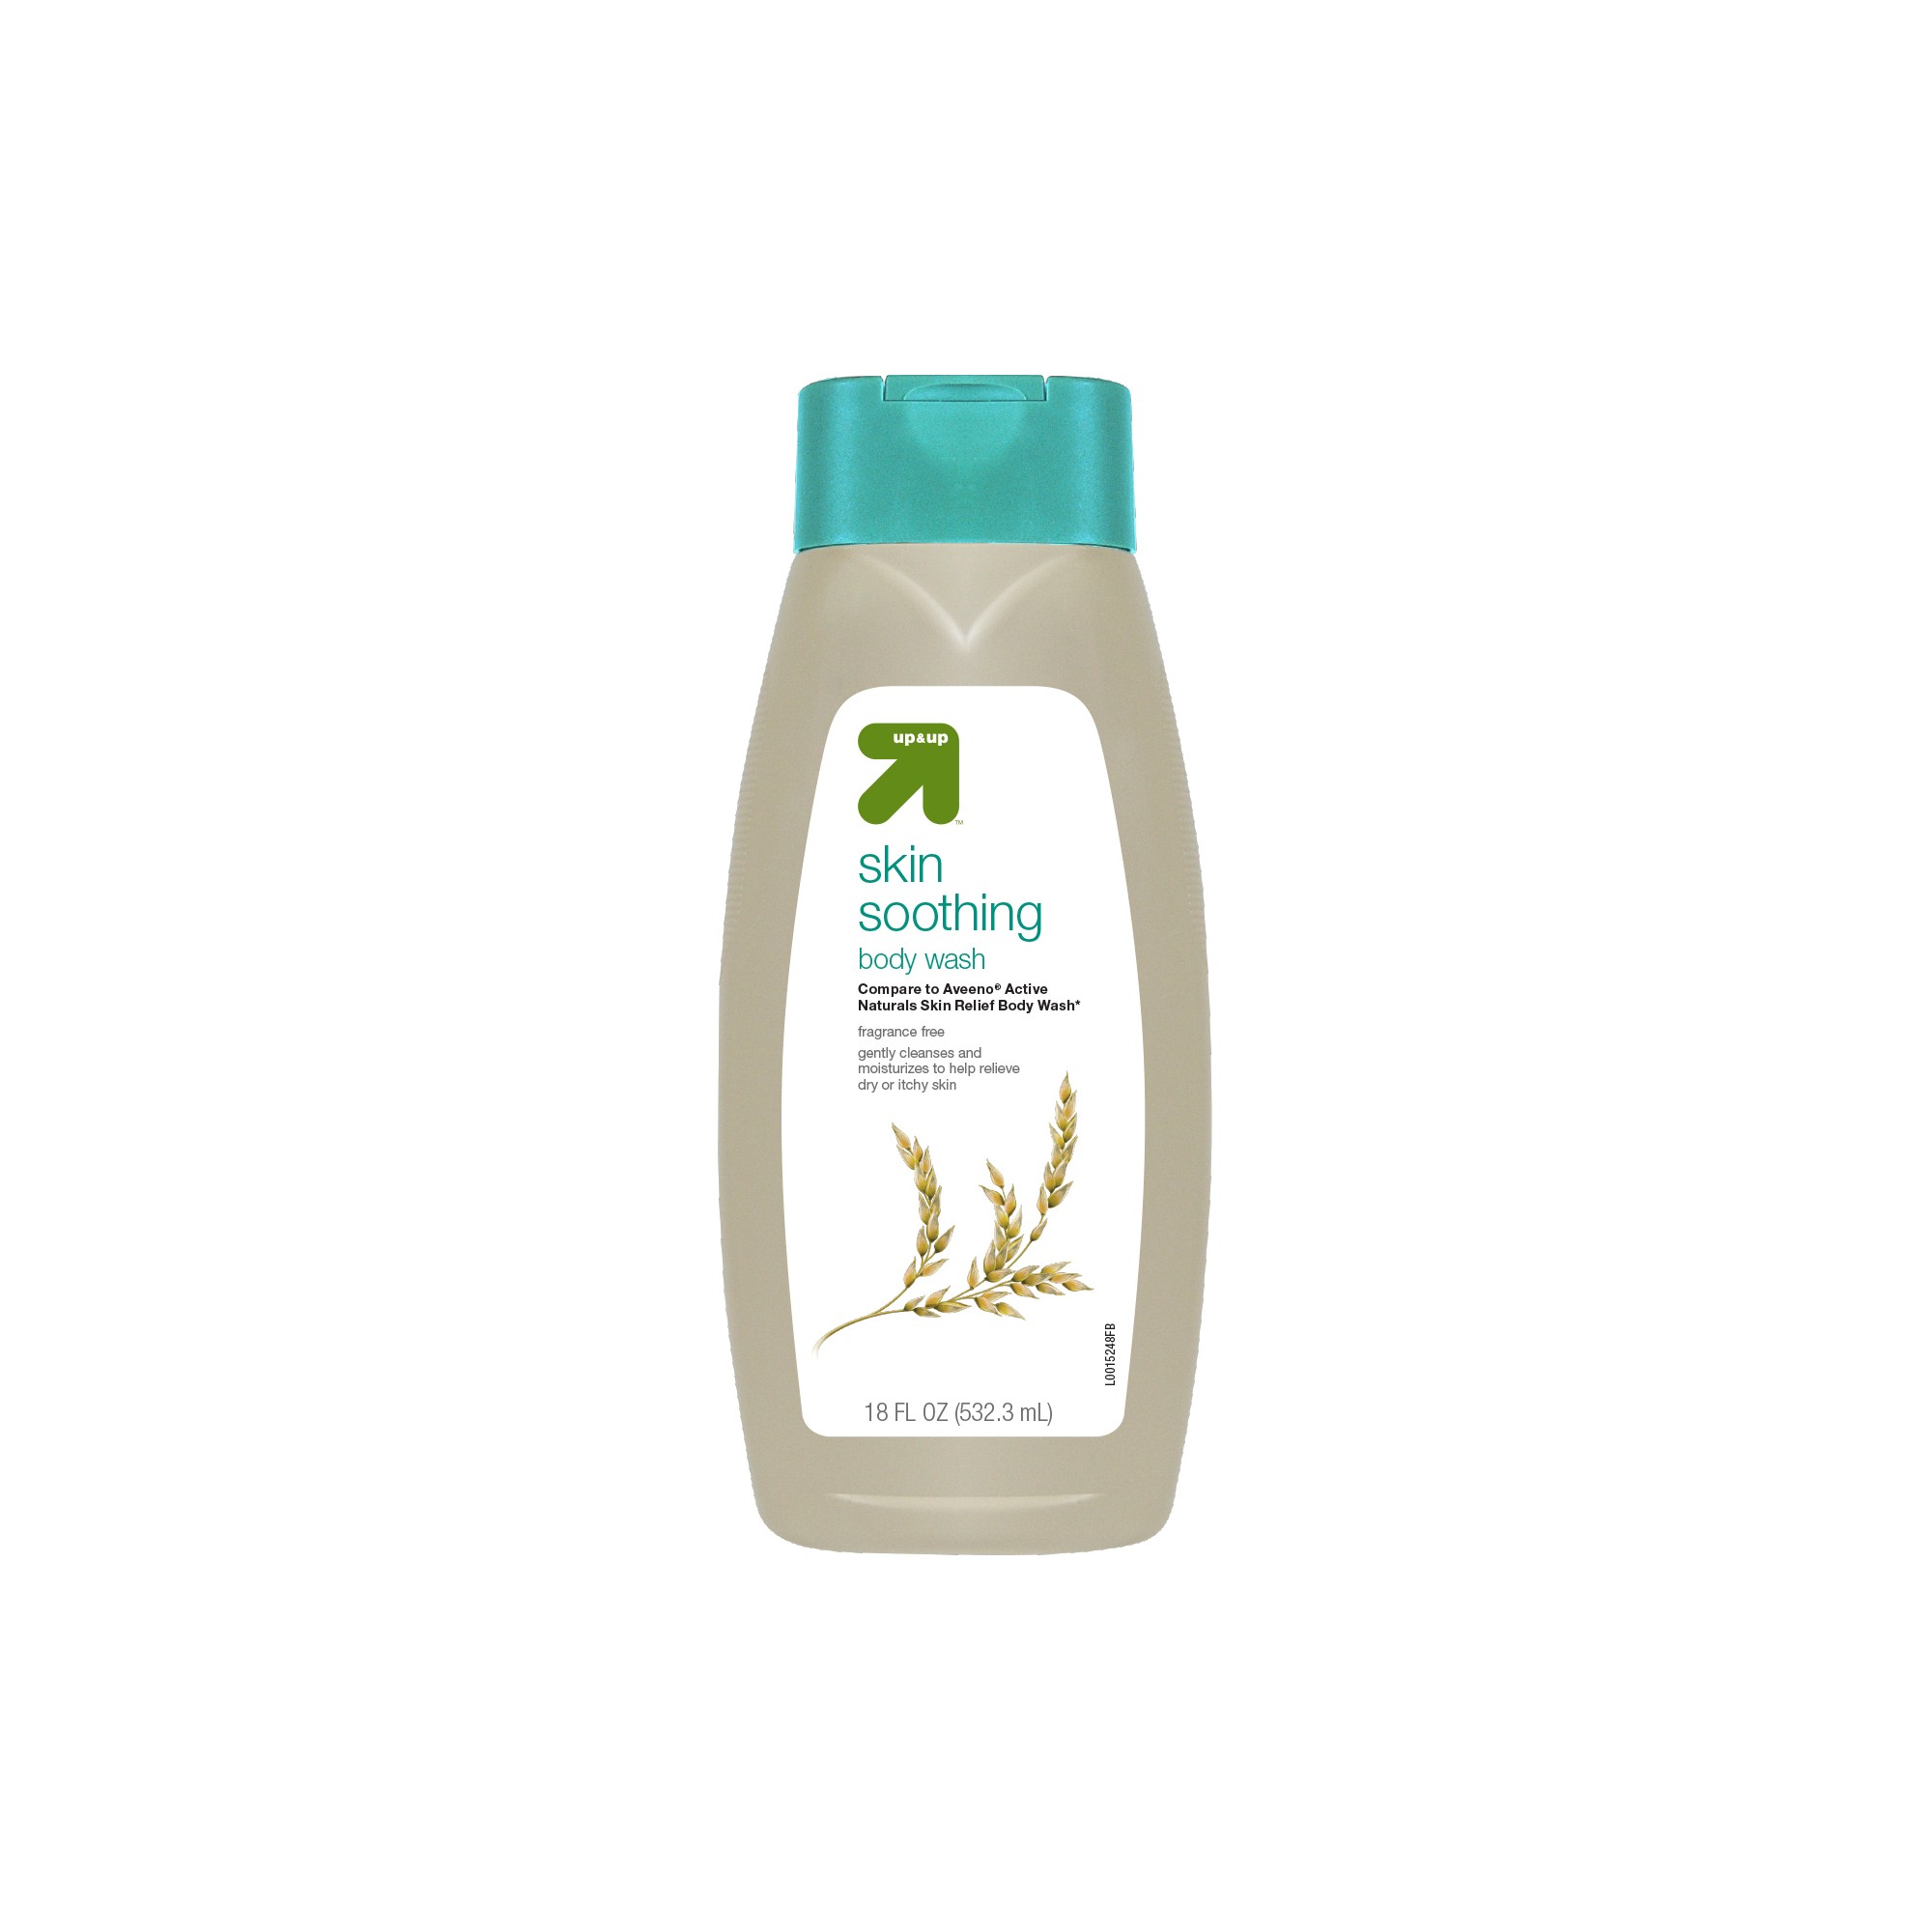 Fragrance Free Soothing Body Wash - 18oz - Up&Up (Compare to Aveeno Active Naturals Skin Relief Body Wash)